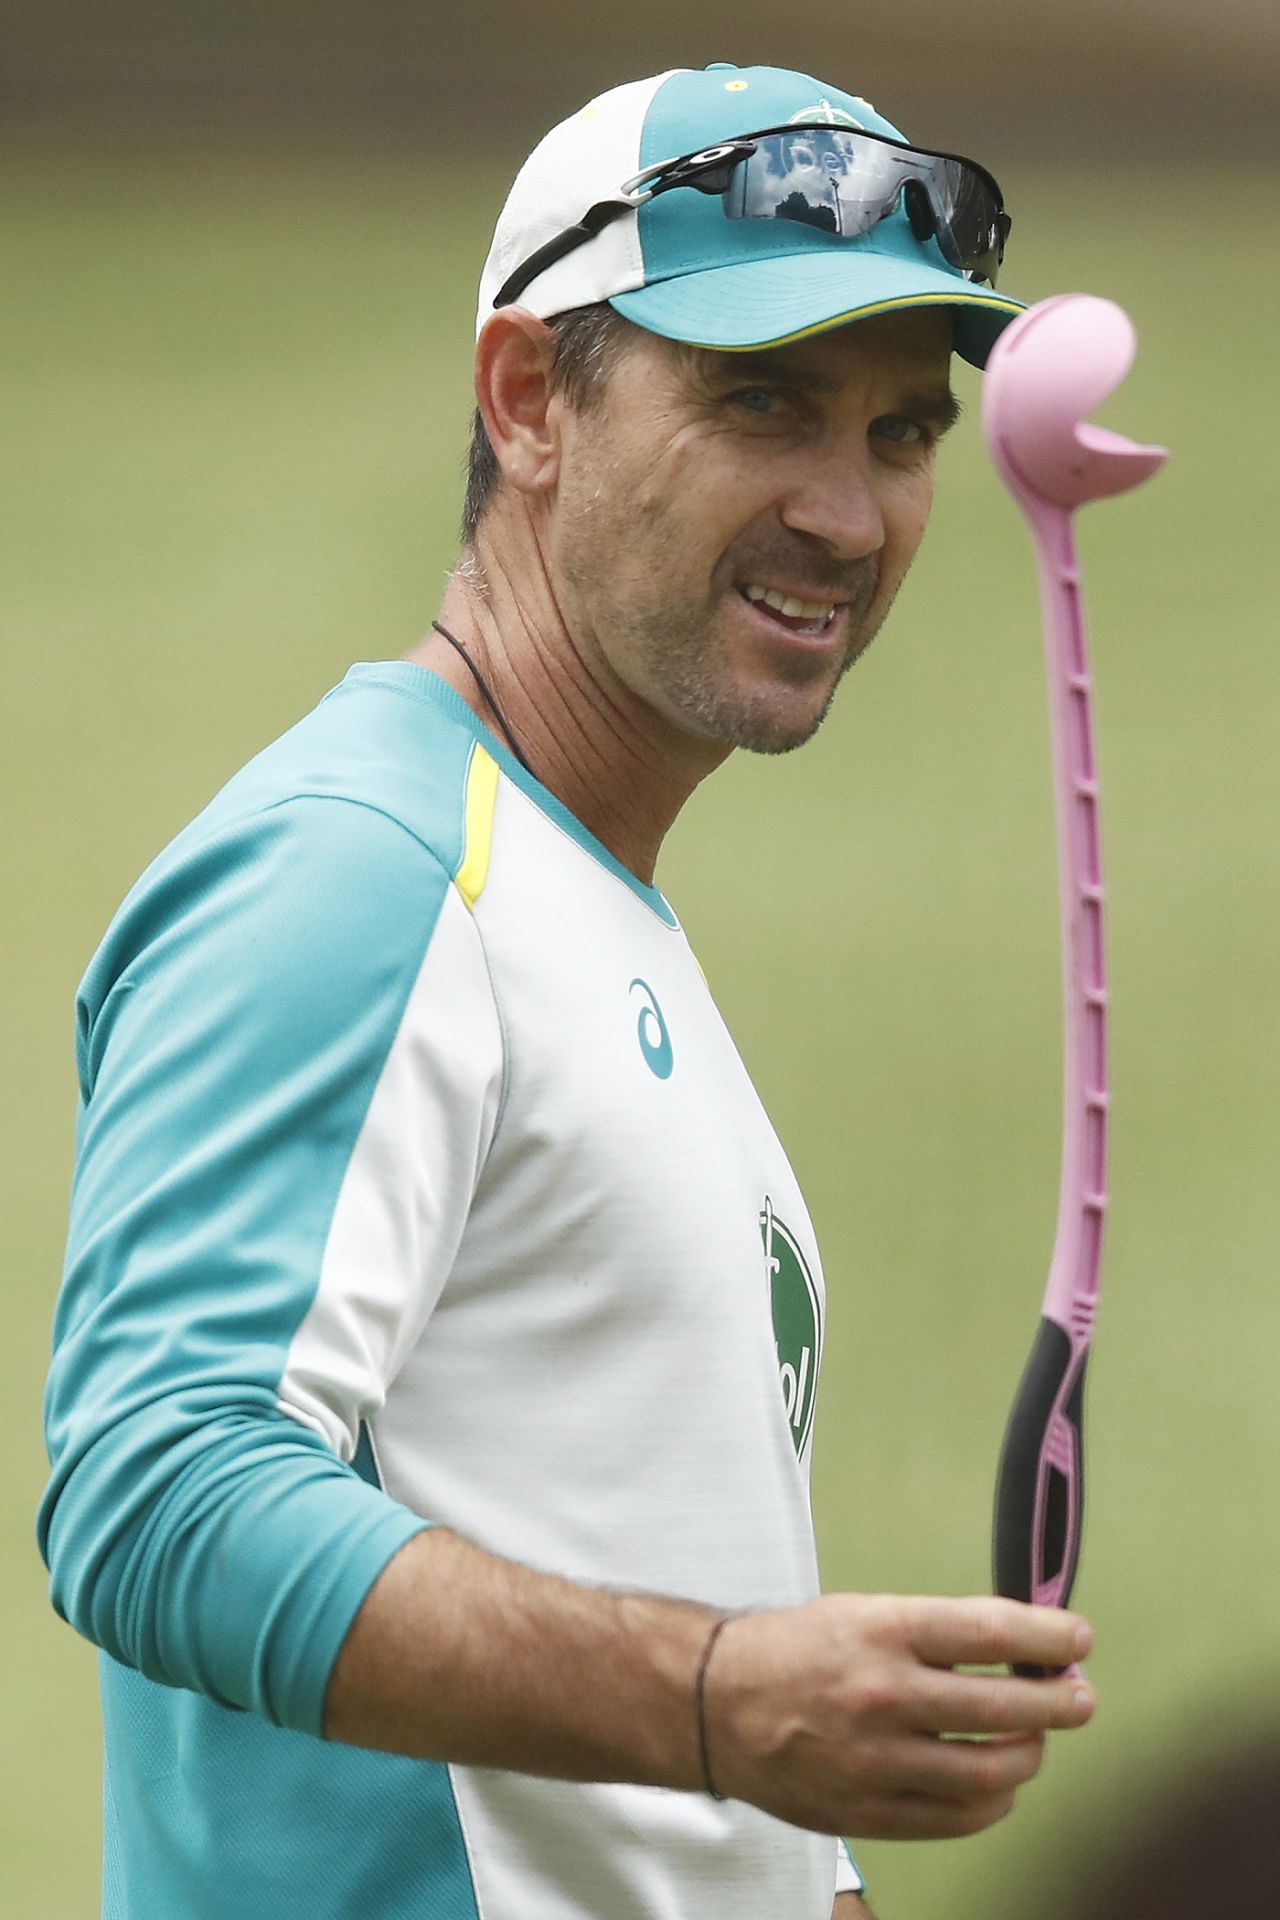 Justin Langer wields the ball-thrower, Melbourne, January 3, 2021